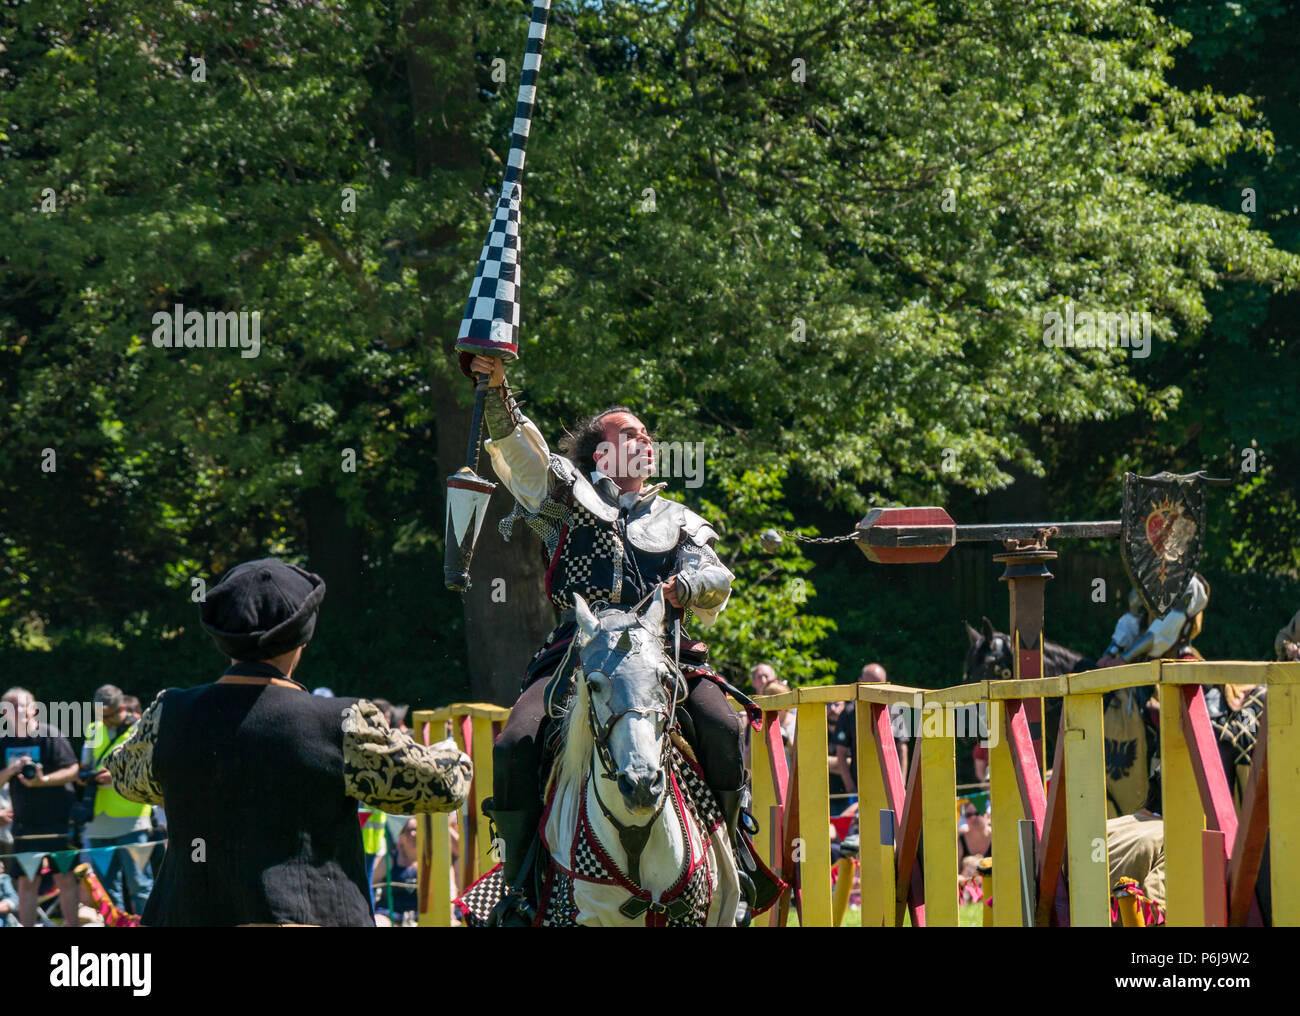 Jousting and Medieval Fair at Linlithgow Palace, Linlithgow, Scotland, United Kingdom, 30th June 2018. Historic Environment Scotland kick off their summer entertainment programme with a fabulous display of Medieval jousting in the grounds of the historic castle. The family fun day includes jousting performed by Les Amis D'Onno equine stunt team. A knight raises his lance in victory Stock Photo